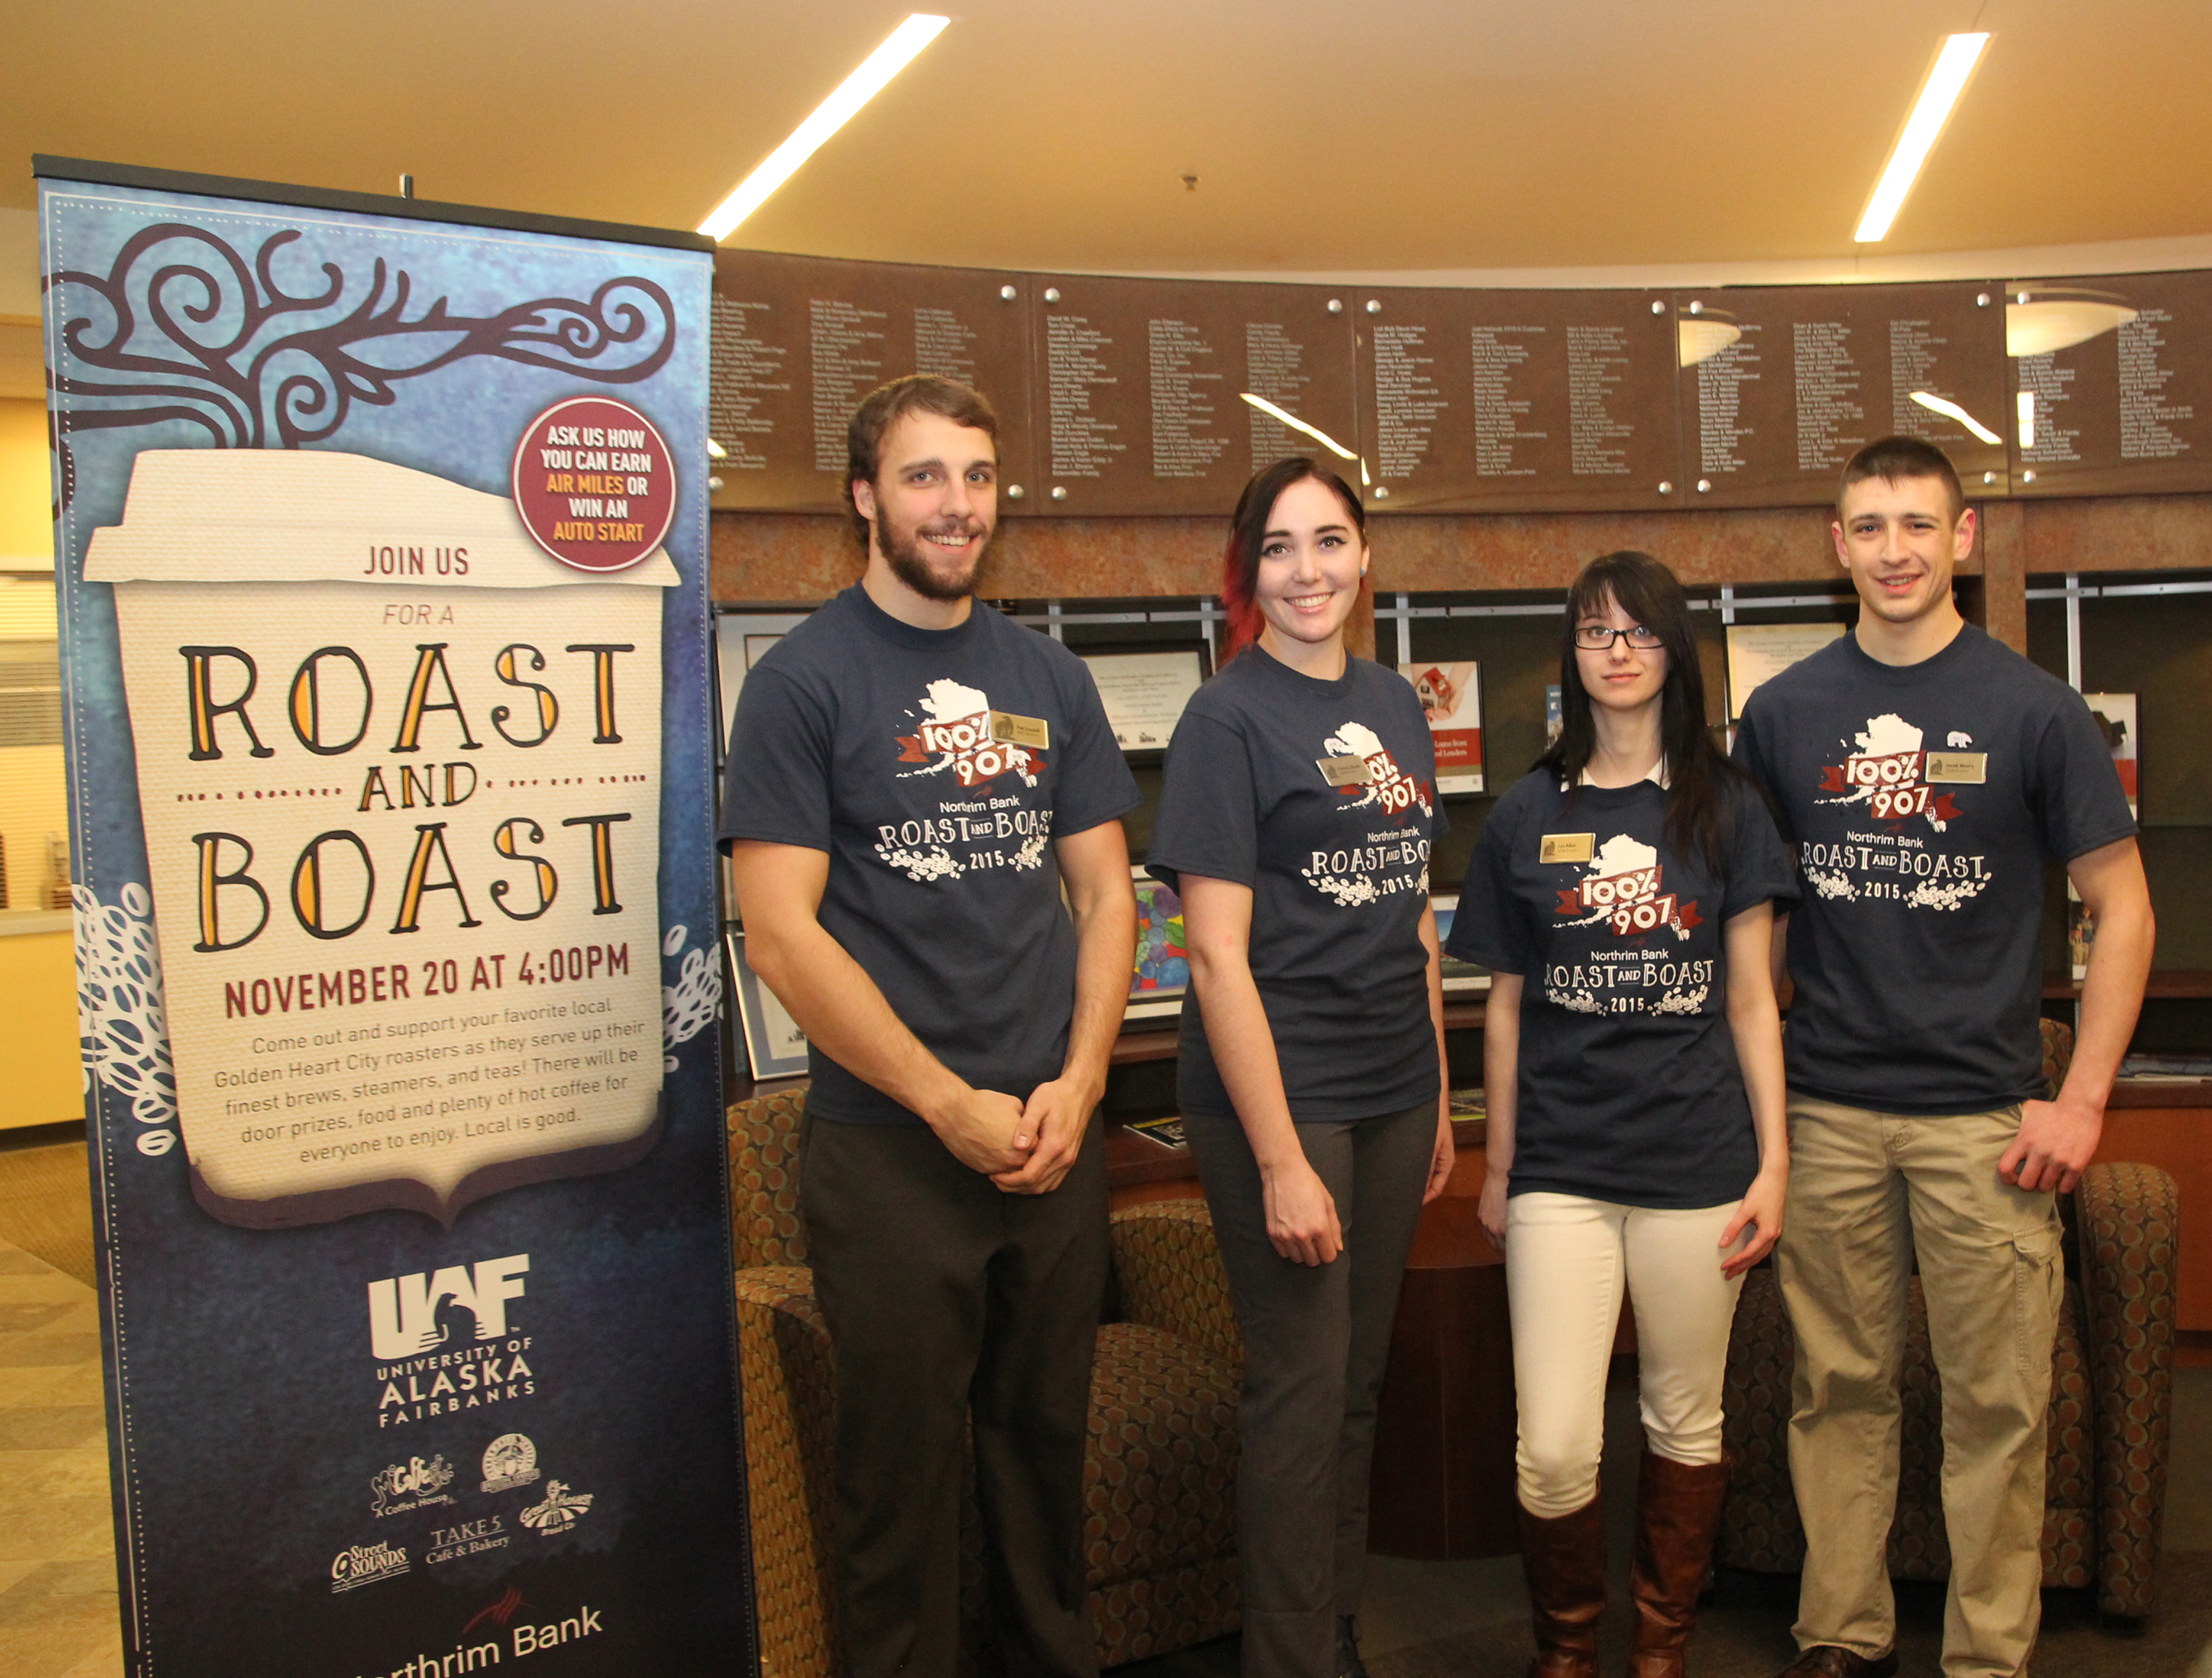 SOM Principles of Marketing students Pat Lassell, Chelsea Roehl, Lyz Allen, and Jake Mooty at Roast and Boast 2015. Photo by Sarah Sackett.